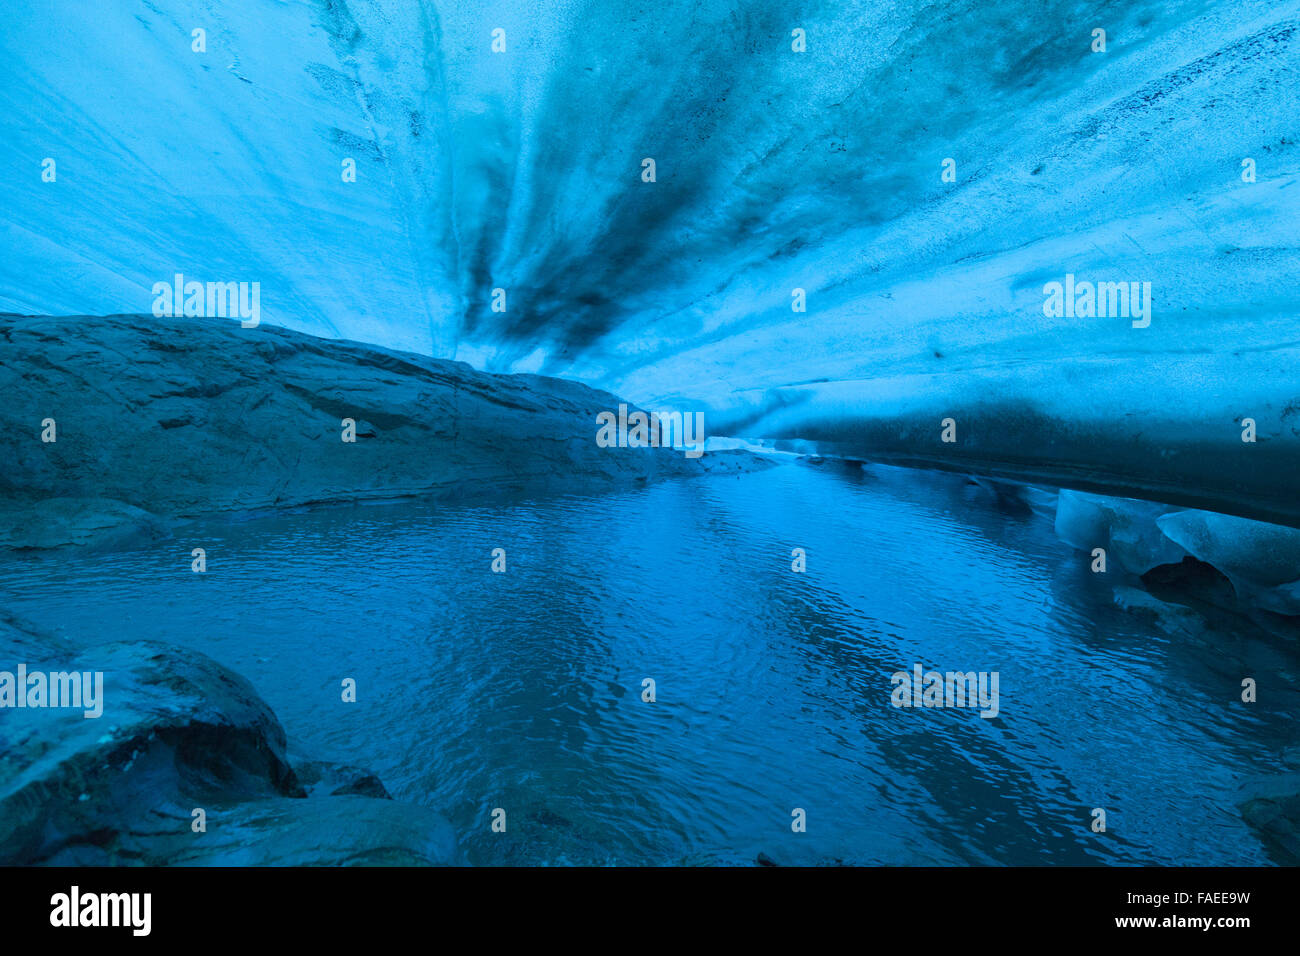 Ice cave underneath the Viedma Glacier, Southern Patagonian Ice Field, Los Glaciares National Park, Argentina Stock Photo